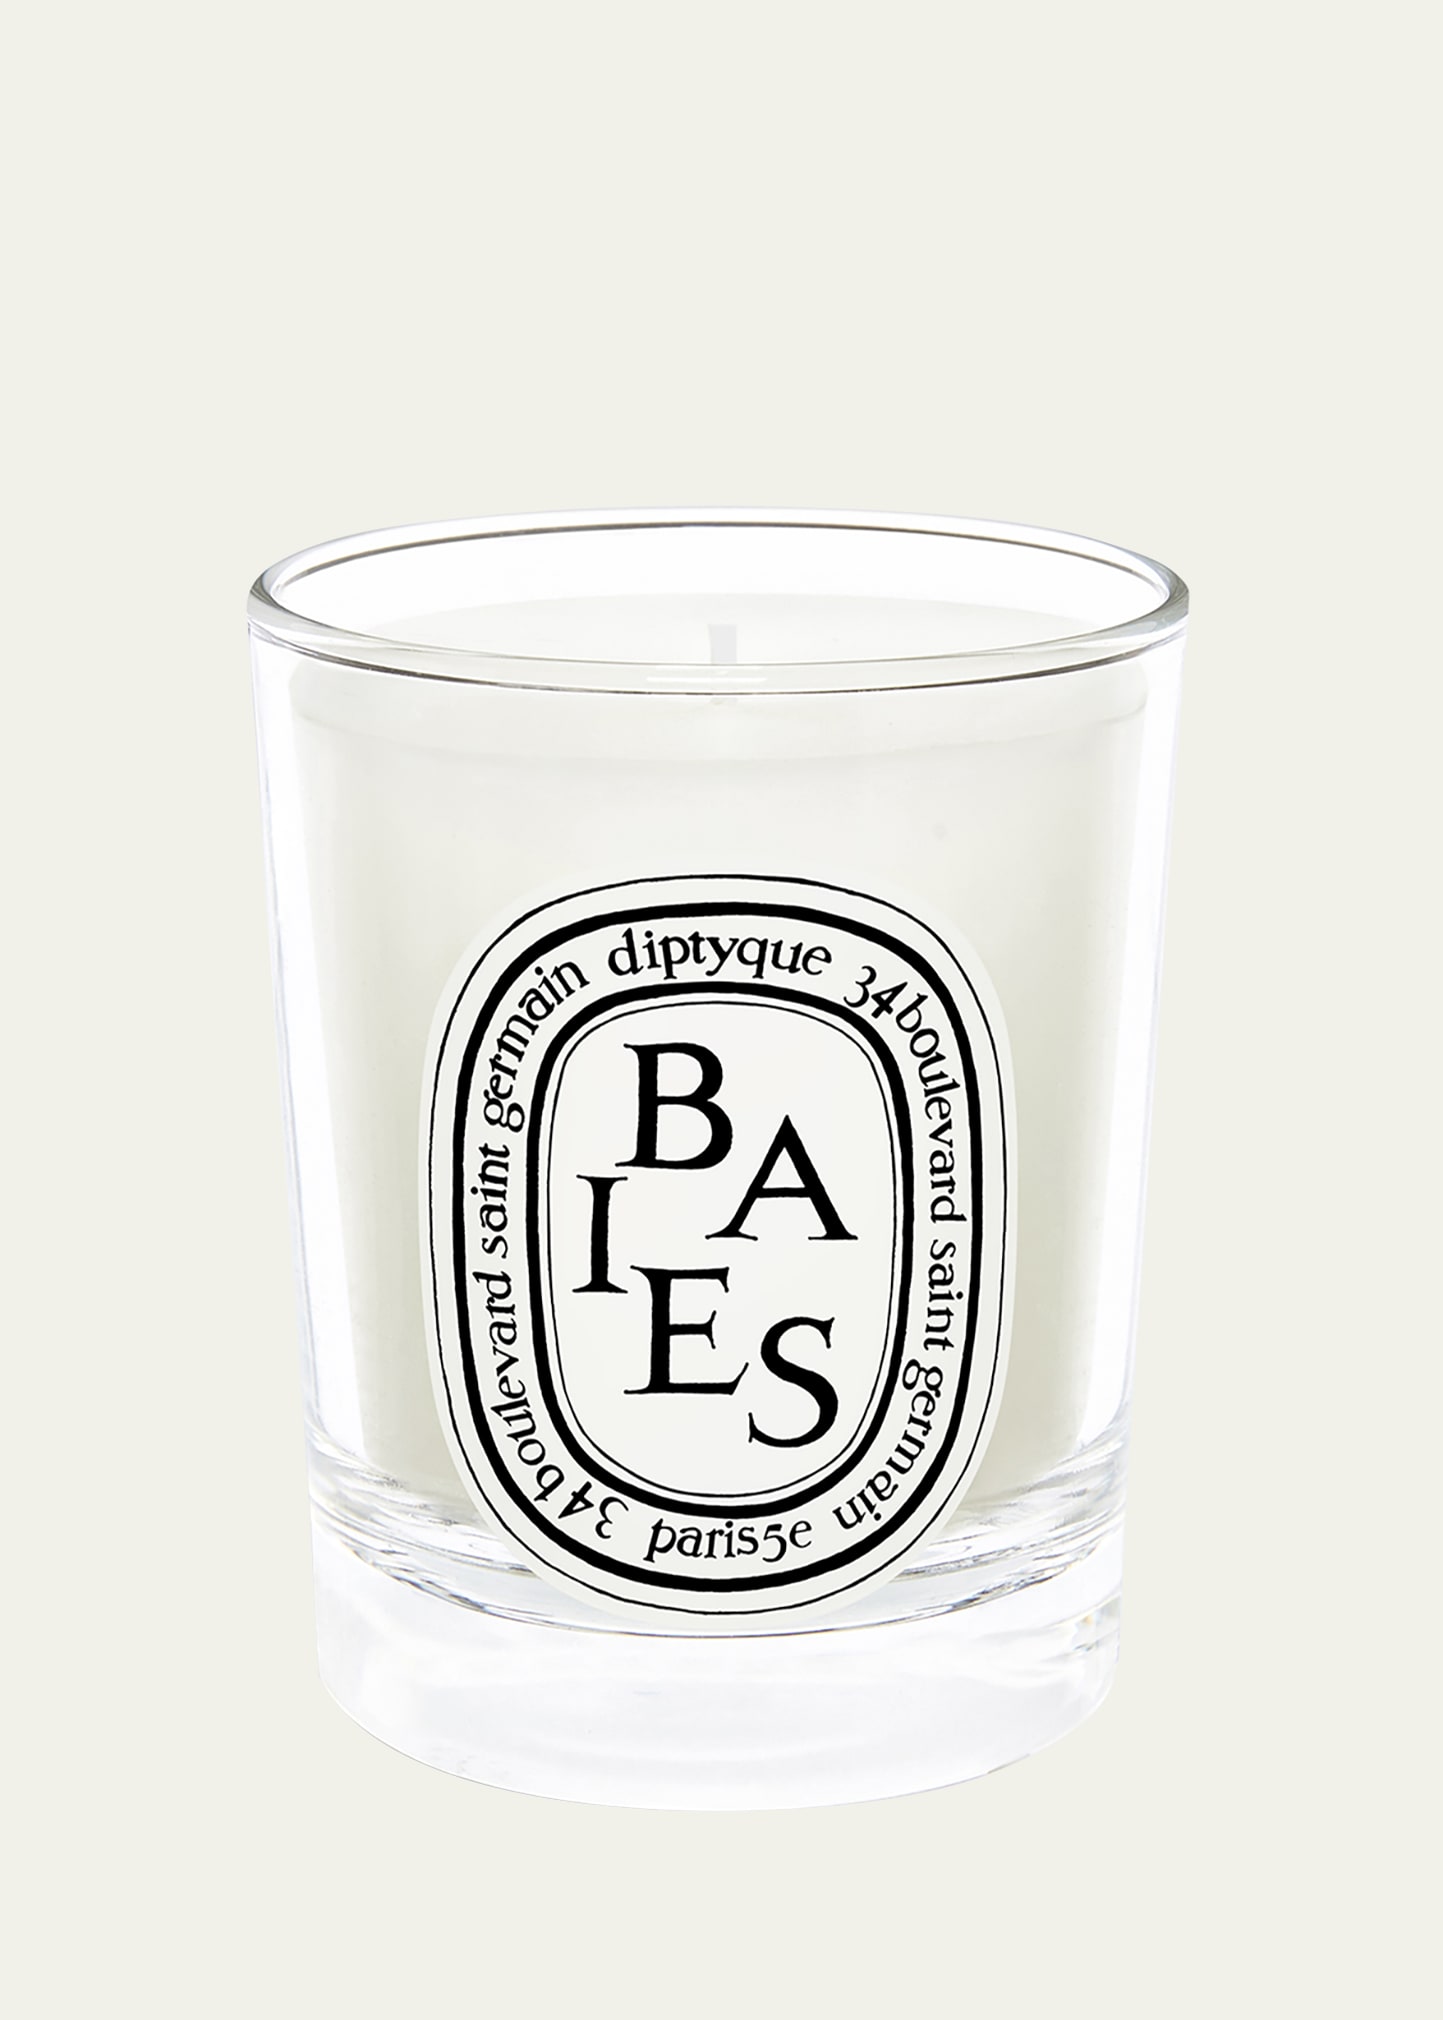 DIPTYQUE Baies (Berries) Scented Candle, 2.4 oz.